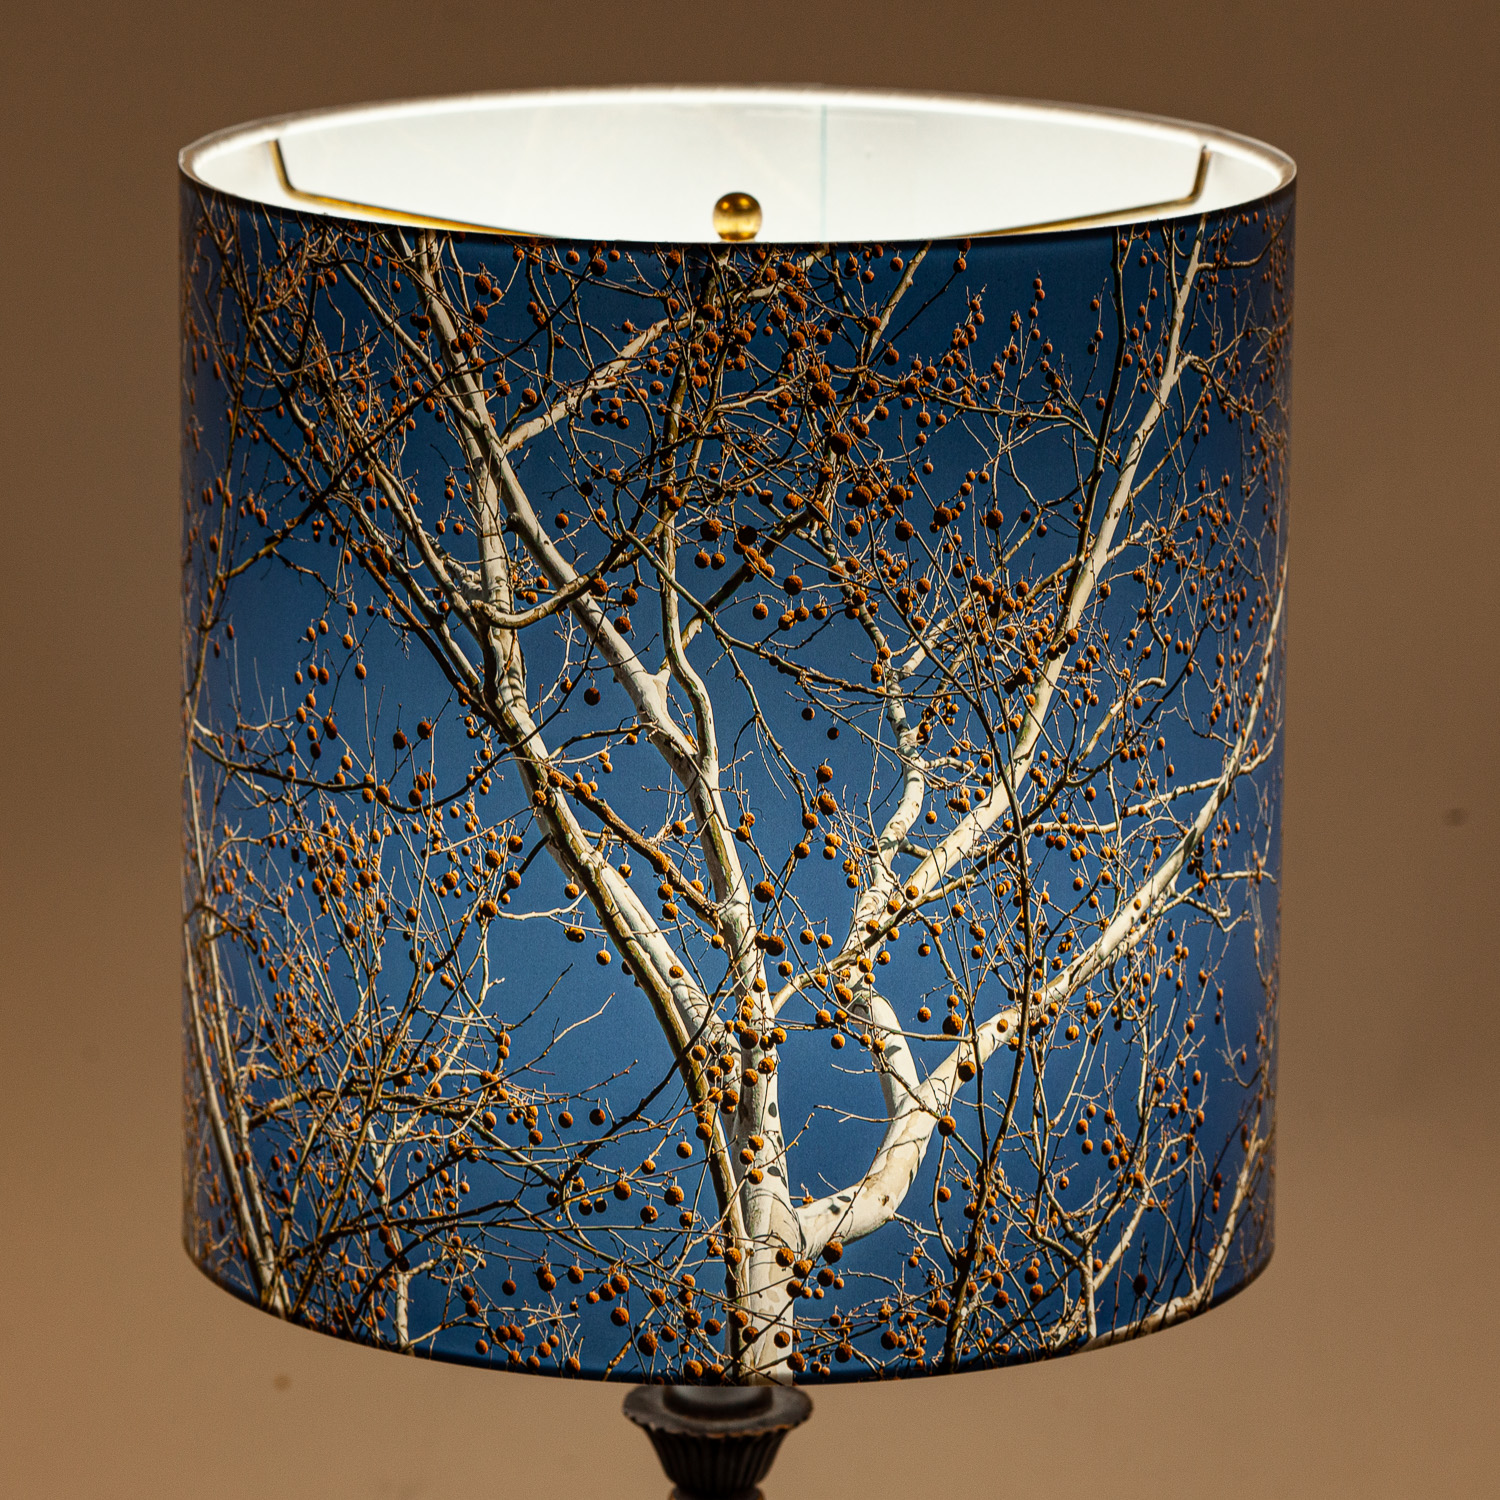 139: Sycamore tree with seedpods -- Photo on Lamp shade by David Elmore